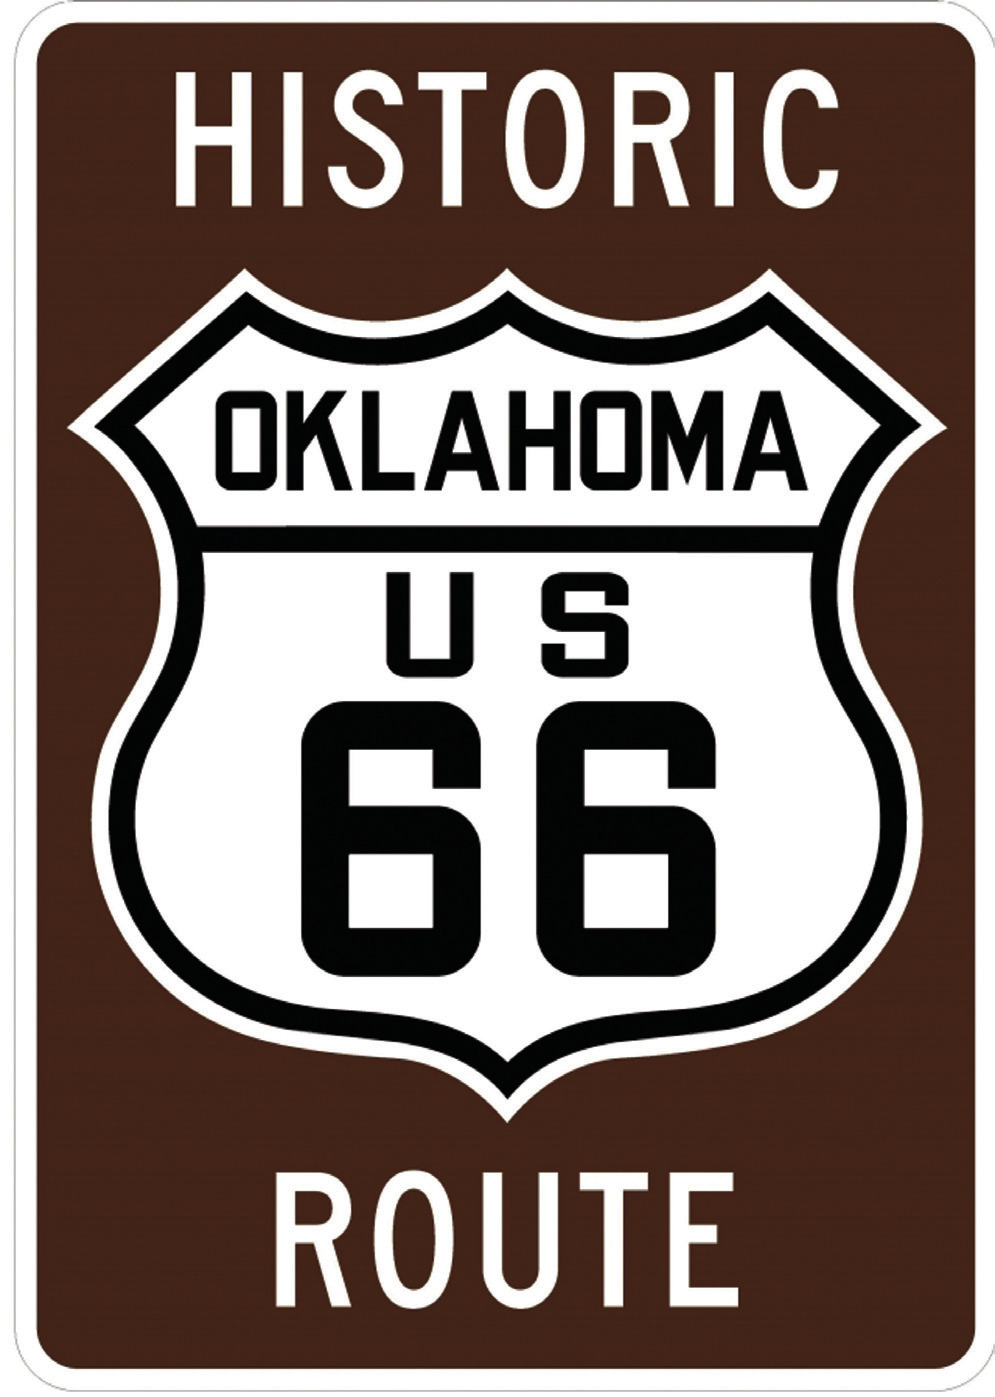 This picture shows one example of Route 66 painted along the historic highway.